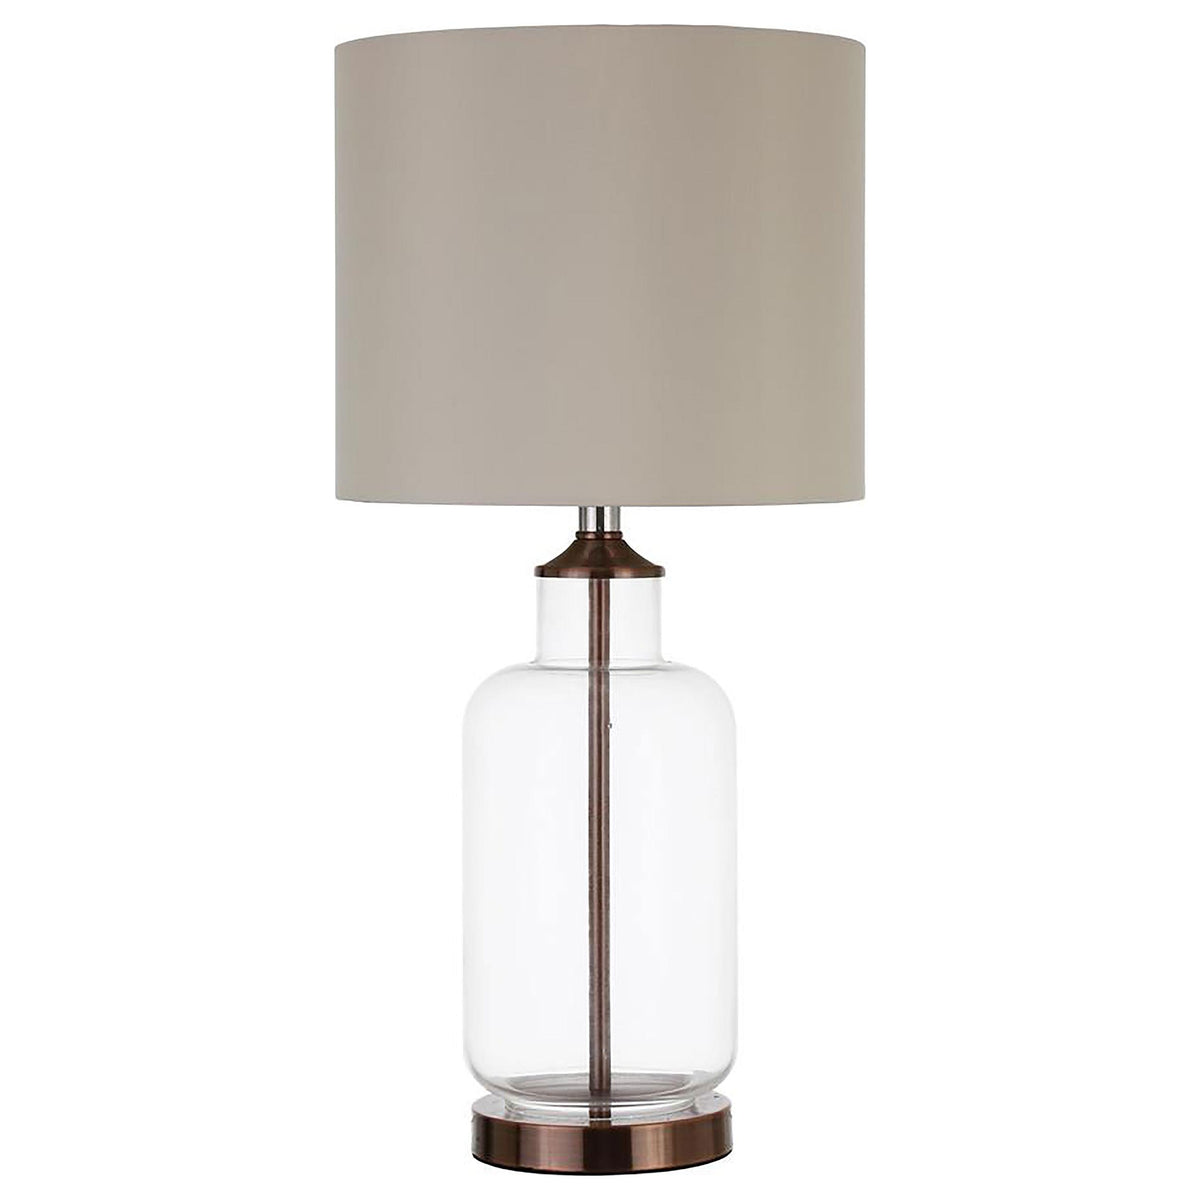 Aisha Drum Shade Table Lamp Creamy Beige and Clear  Las Vegas Furniture Stores